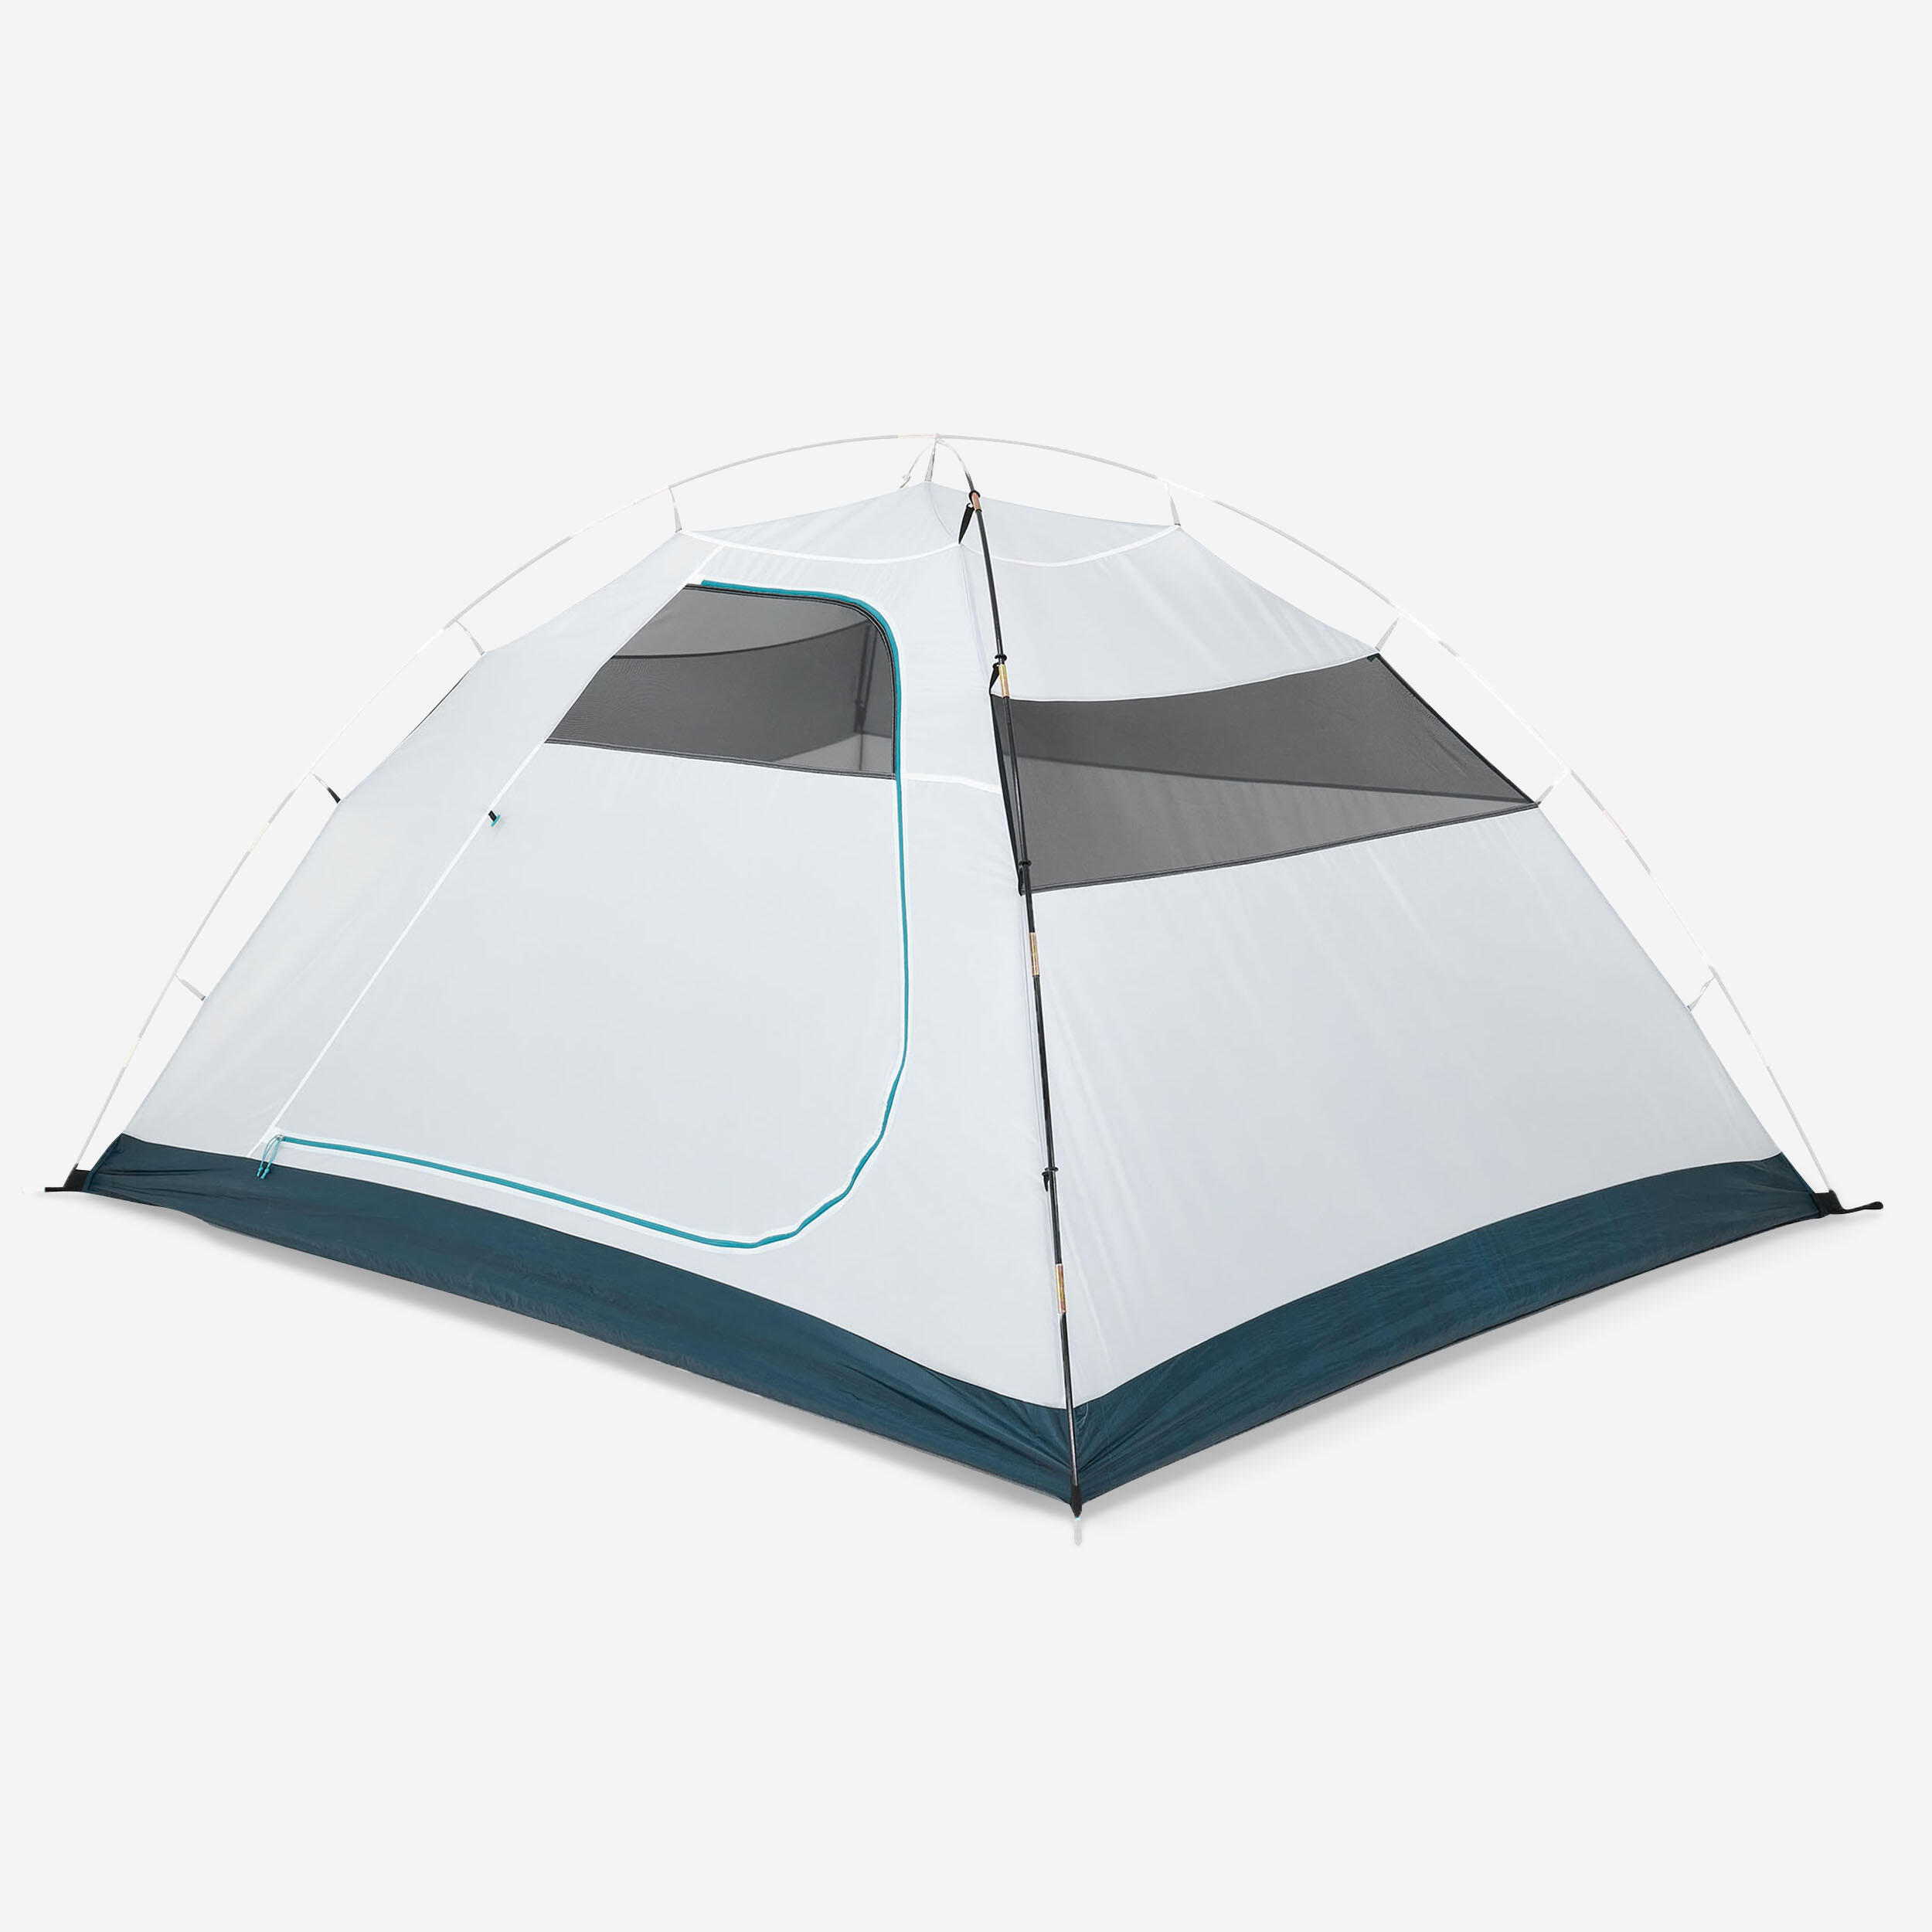 QUECHUA BEDROOM - SPARE PART FOR THE MH100 4 PERSON TENT